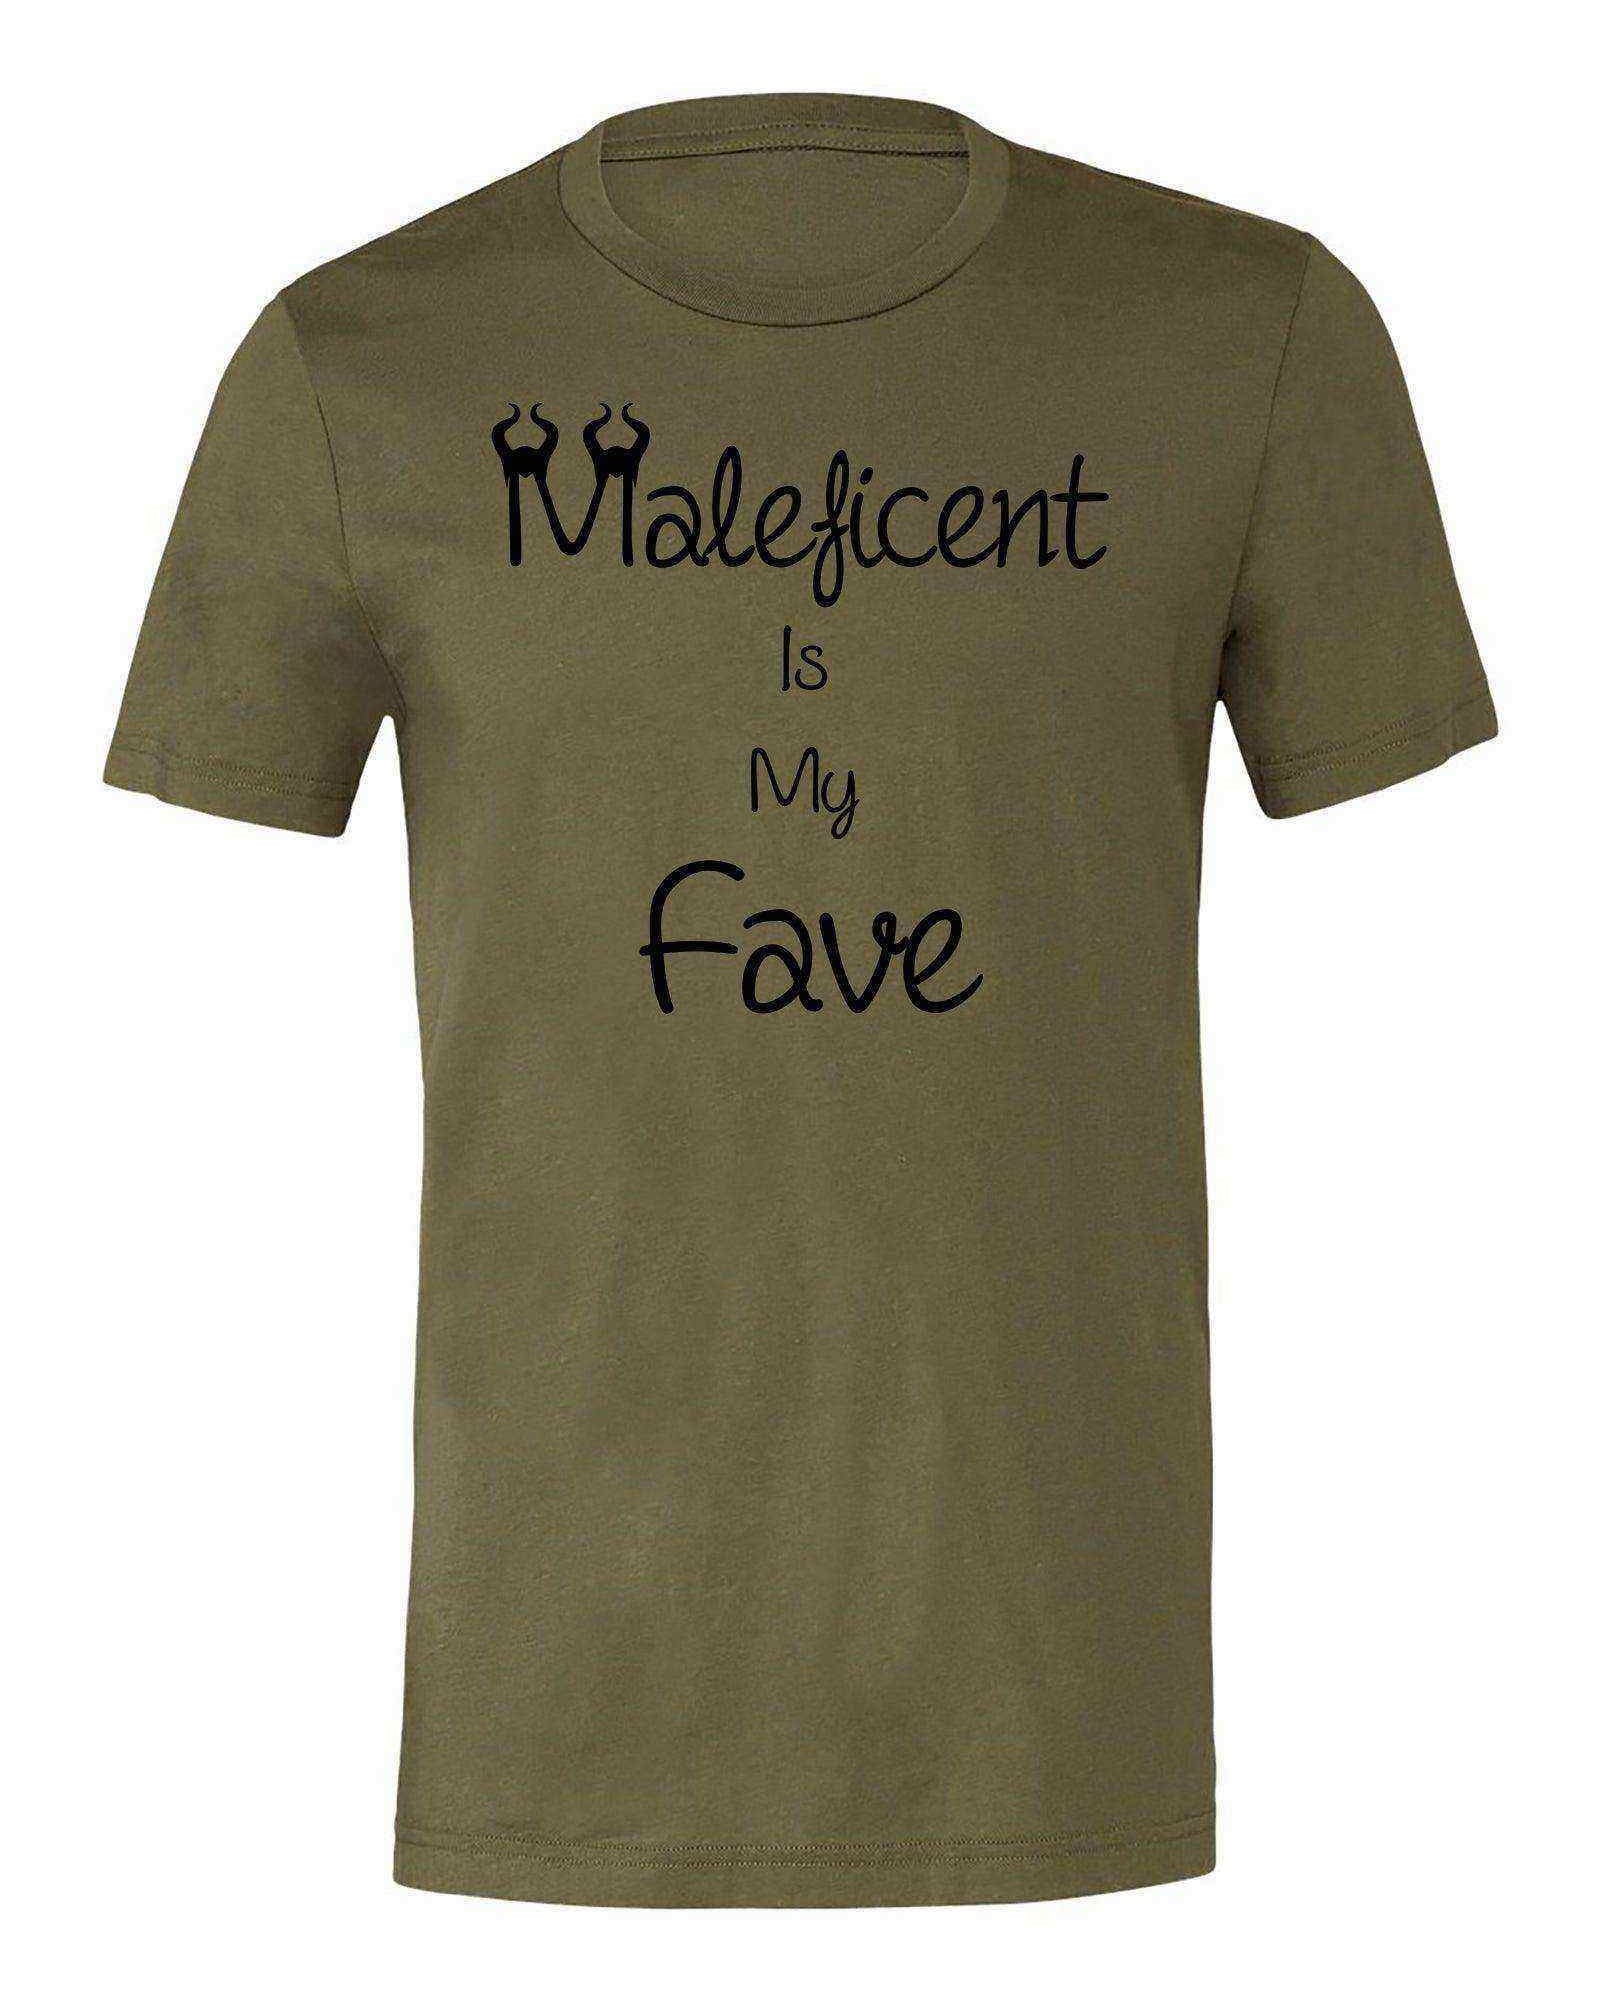 Maleficent is my Fave Shirt - Dylan's Tees